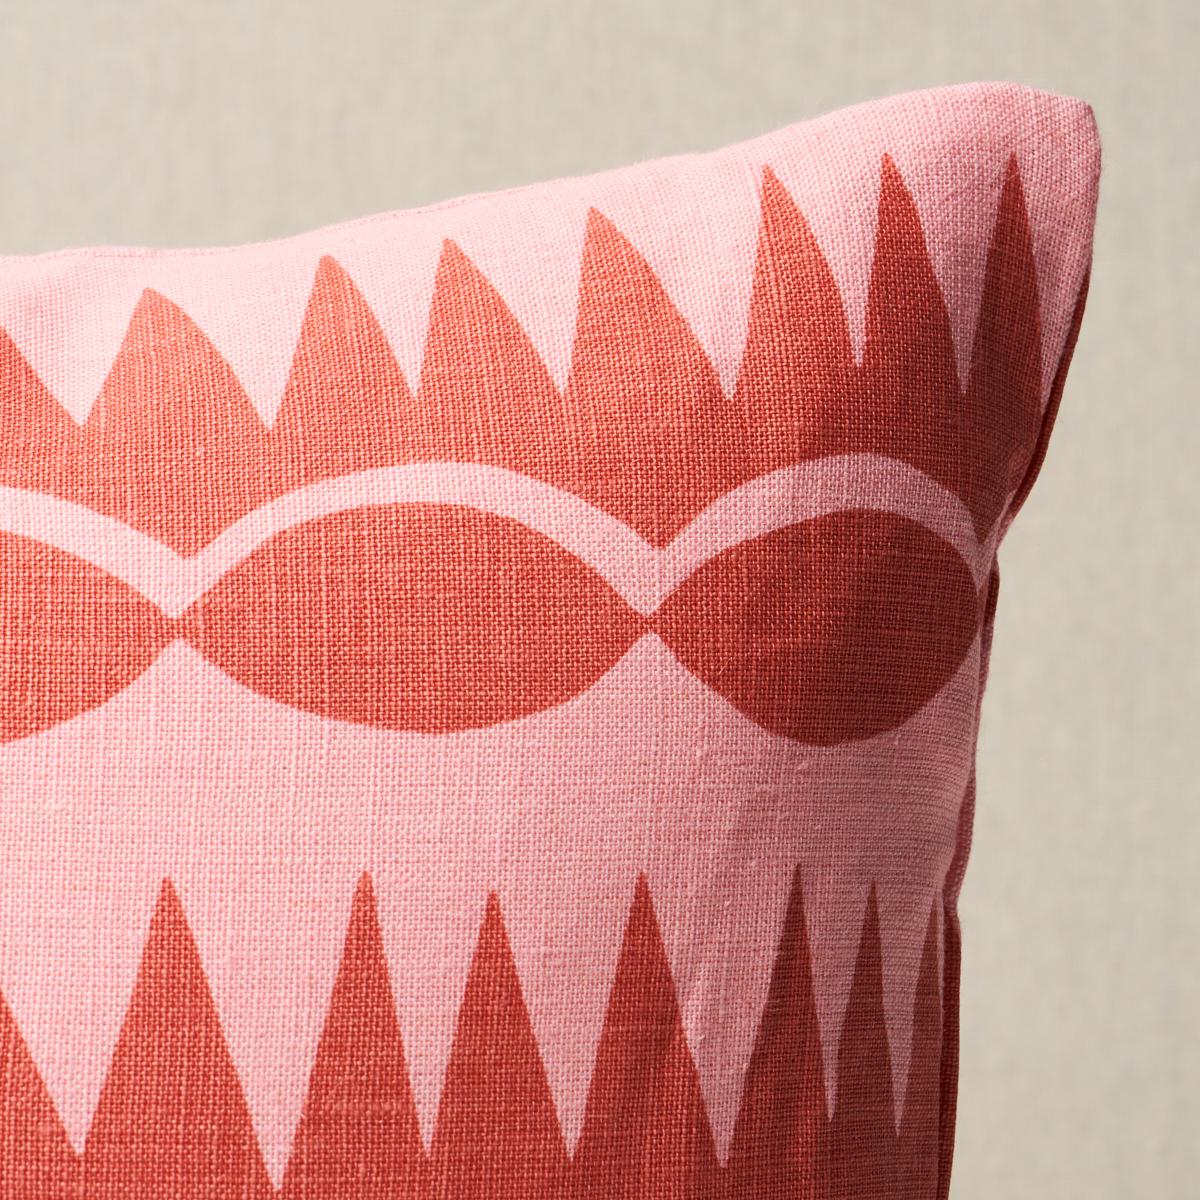 This pillow features Dagger Stripe by Drusus Tabor with a knife edge finish. Created in collaboration with Drusus Tabor, Dagger Stripe evokes the rhythmic geometric forms of Brancusi sculptures. Pillow includes a feather/down fill insert and hidden